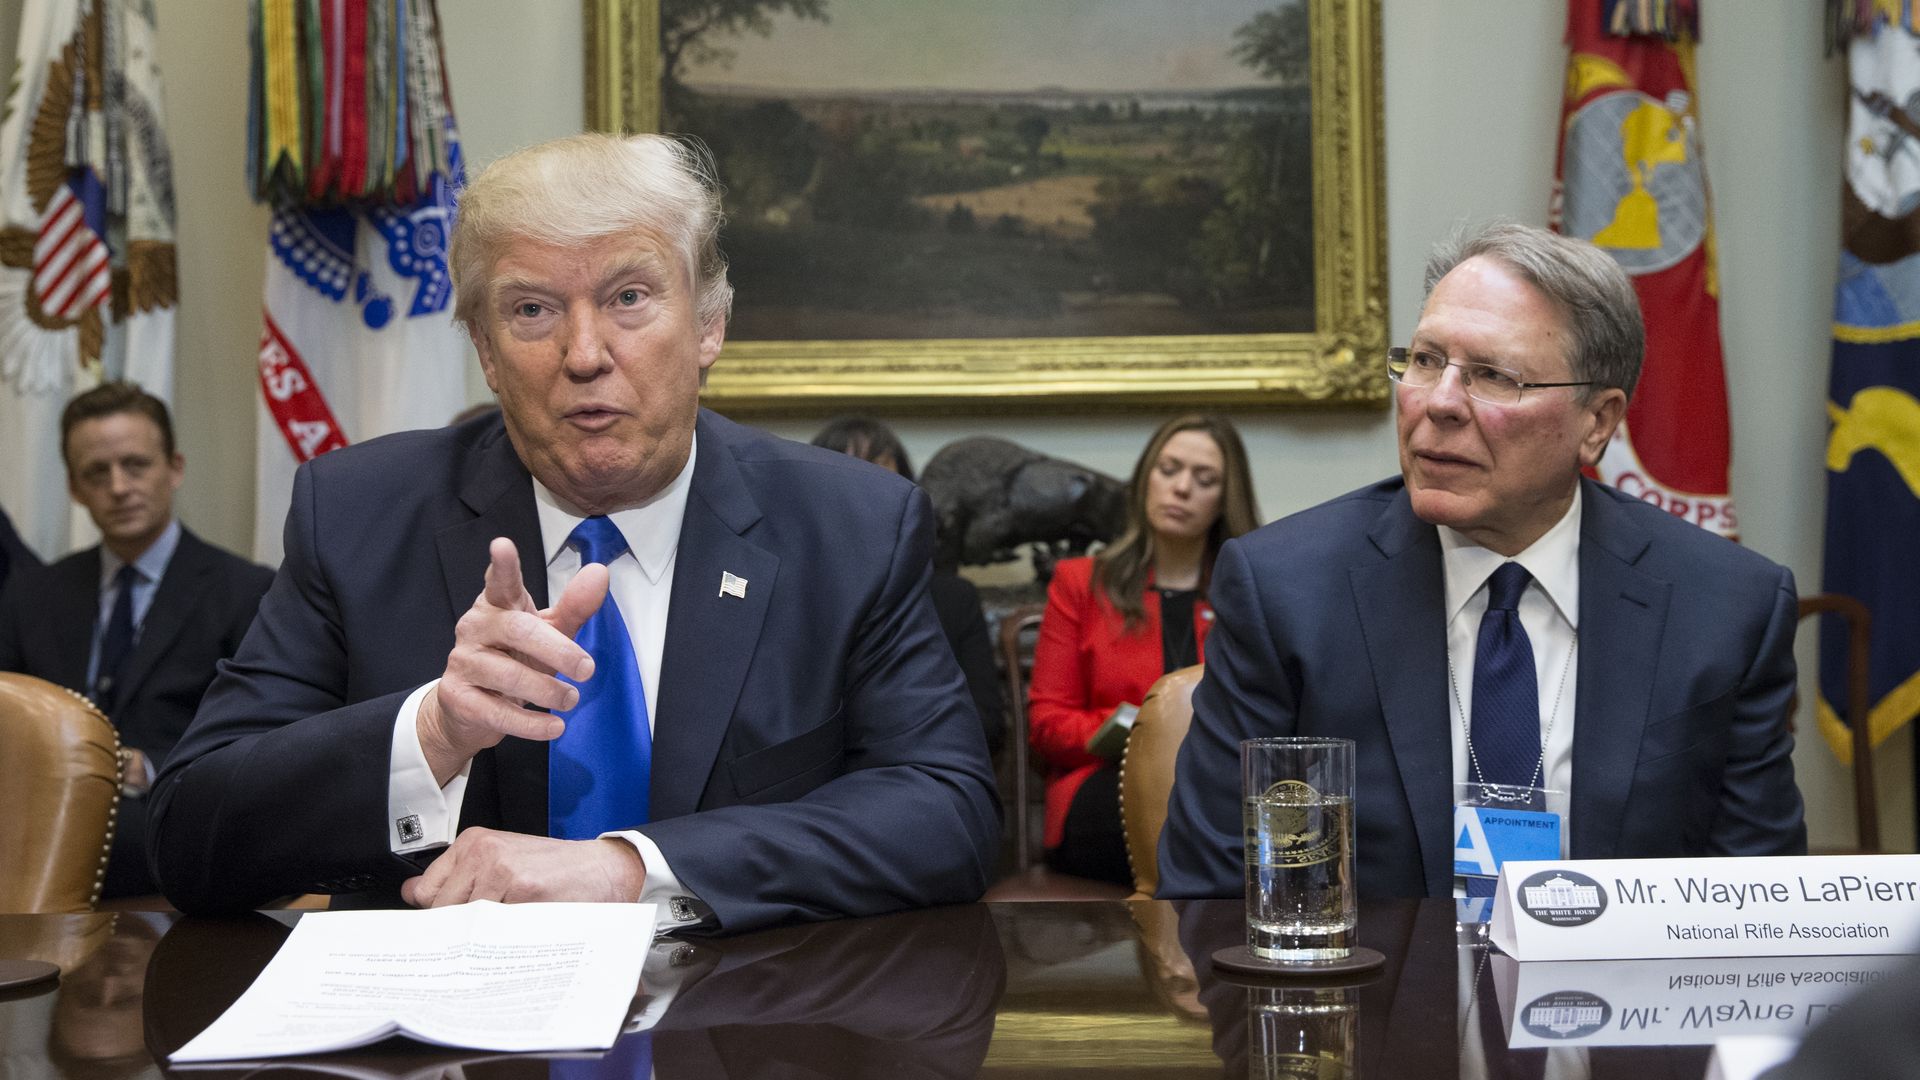 President Donald Trump (L) sits beside Executive Vice President and CEO of the National Rifle Association (NRA) Wayne LaPierre (R)in the Roosevelt Room of the White House on February 1, 2017 